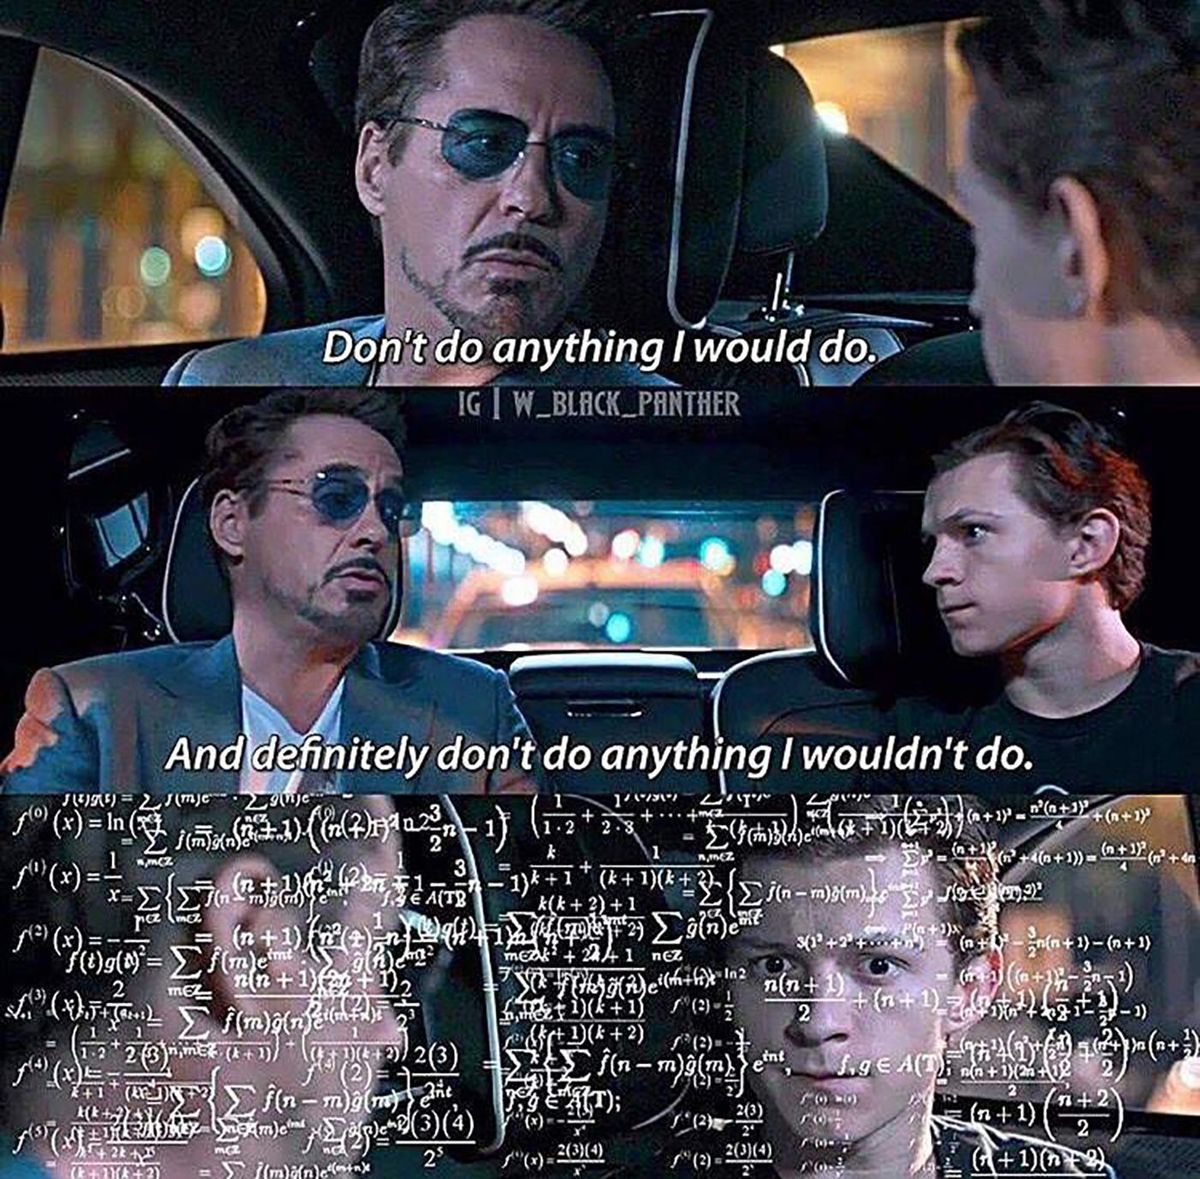 17 Totally Dank Iron Man And Spider-Man Memes